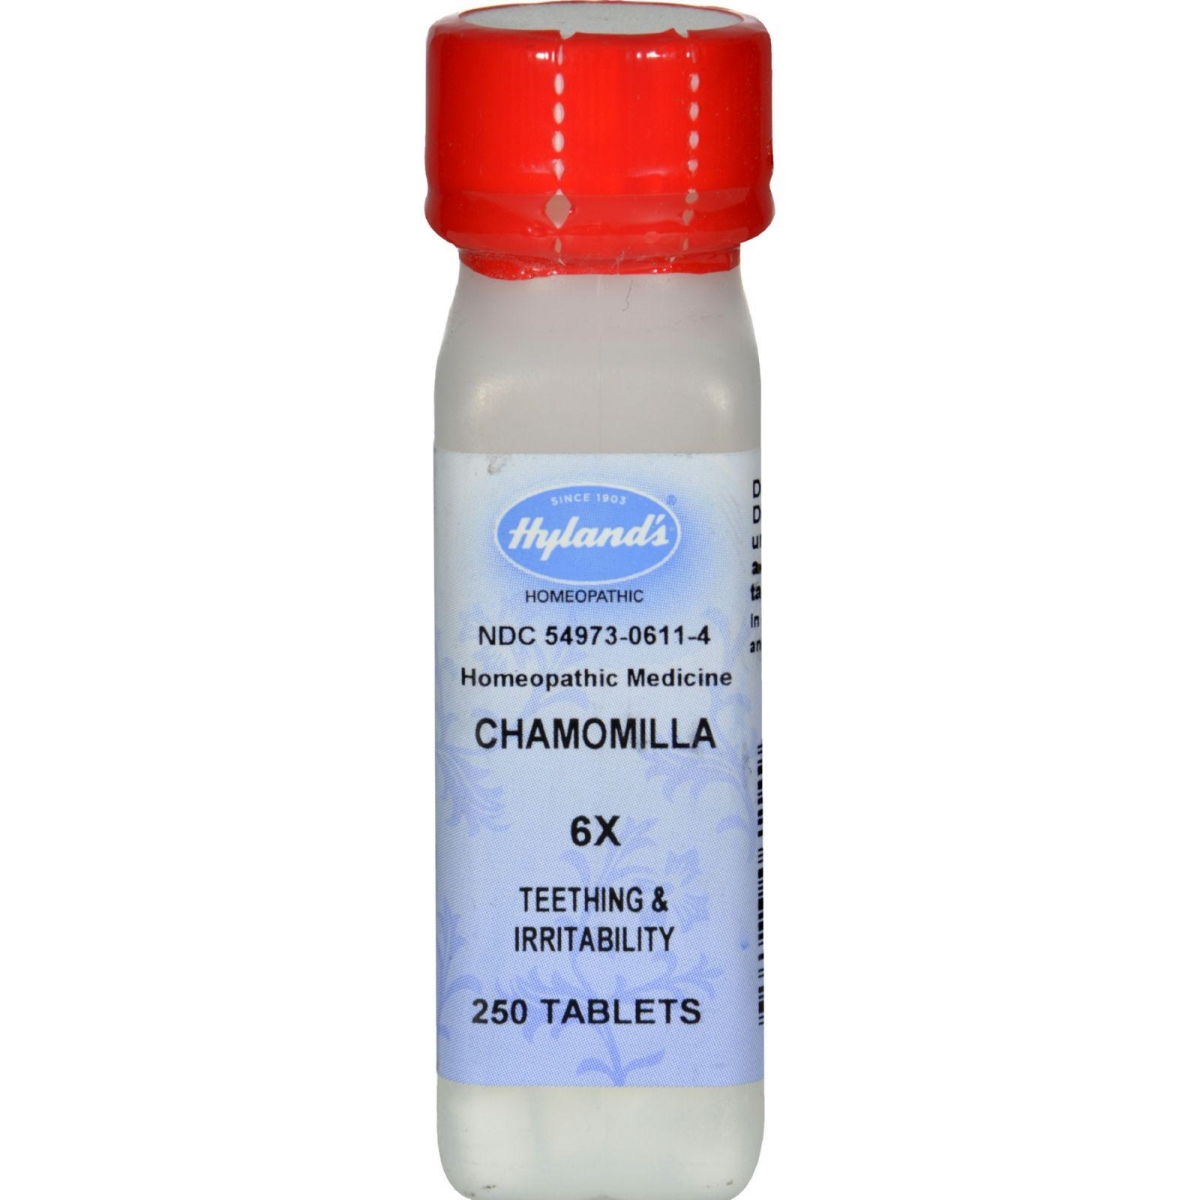 Hg0932822 Homeopathic Chamomilla 6x - 250 Tablets